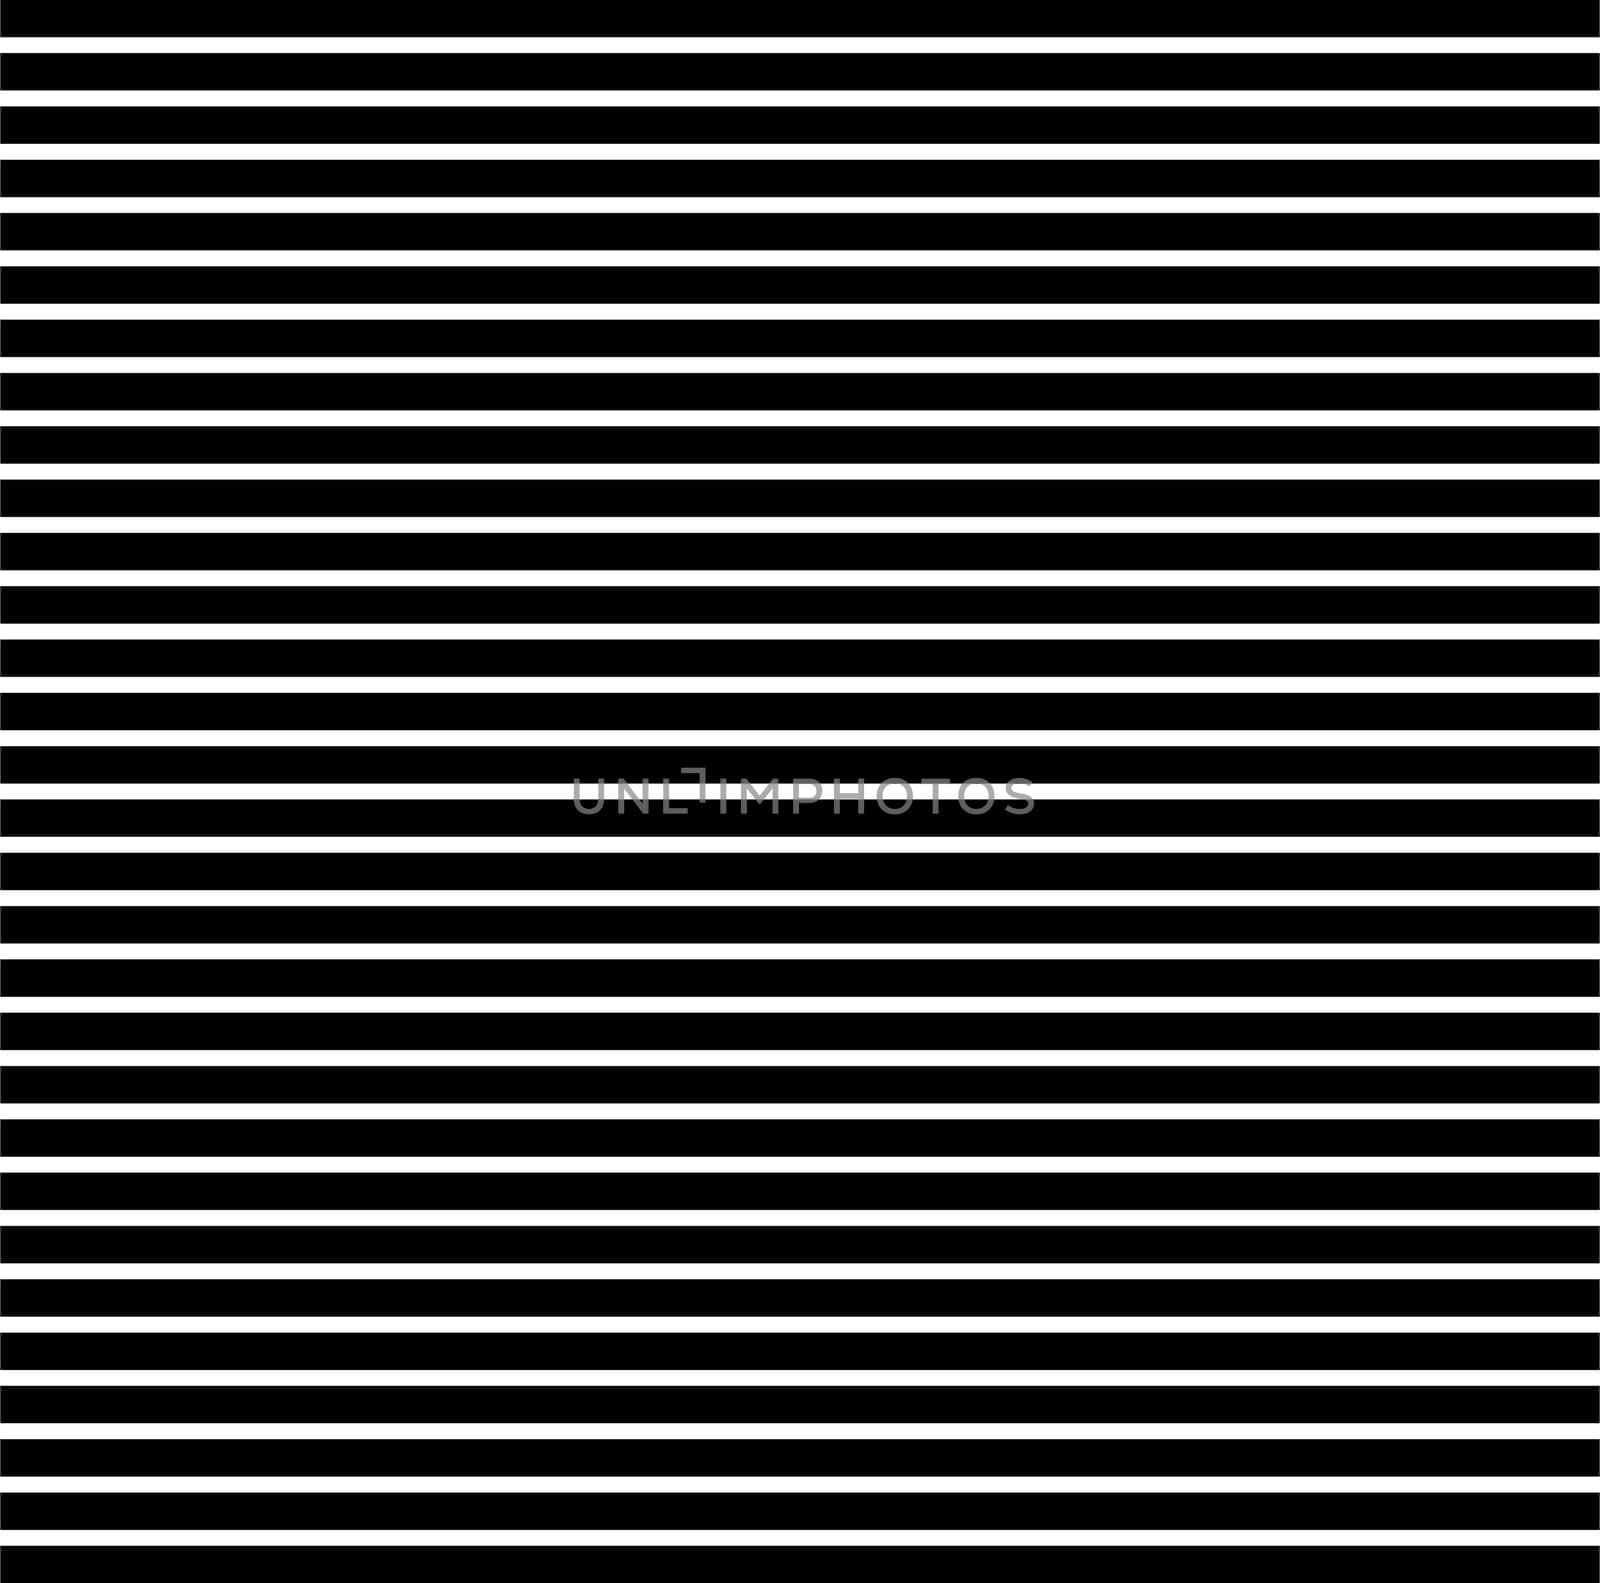 Backgrounds horizontal lines stripes different thickness, intensity, horizontal stripe design